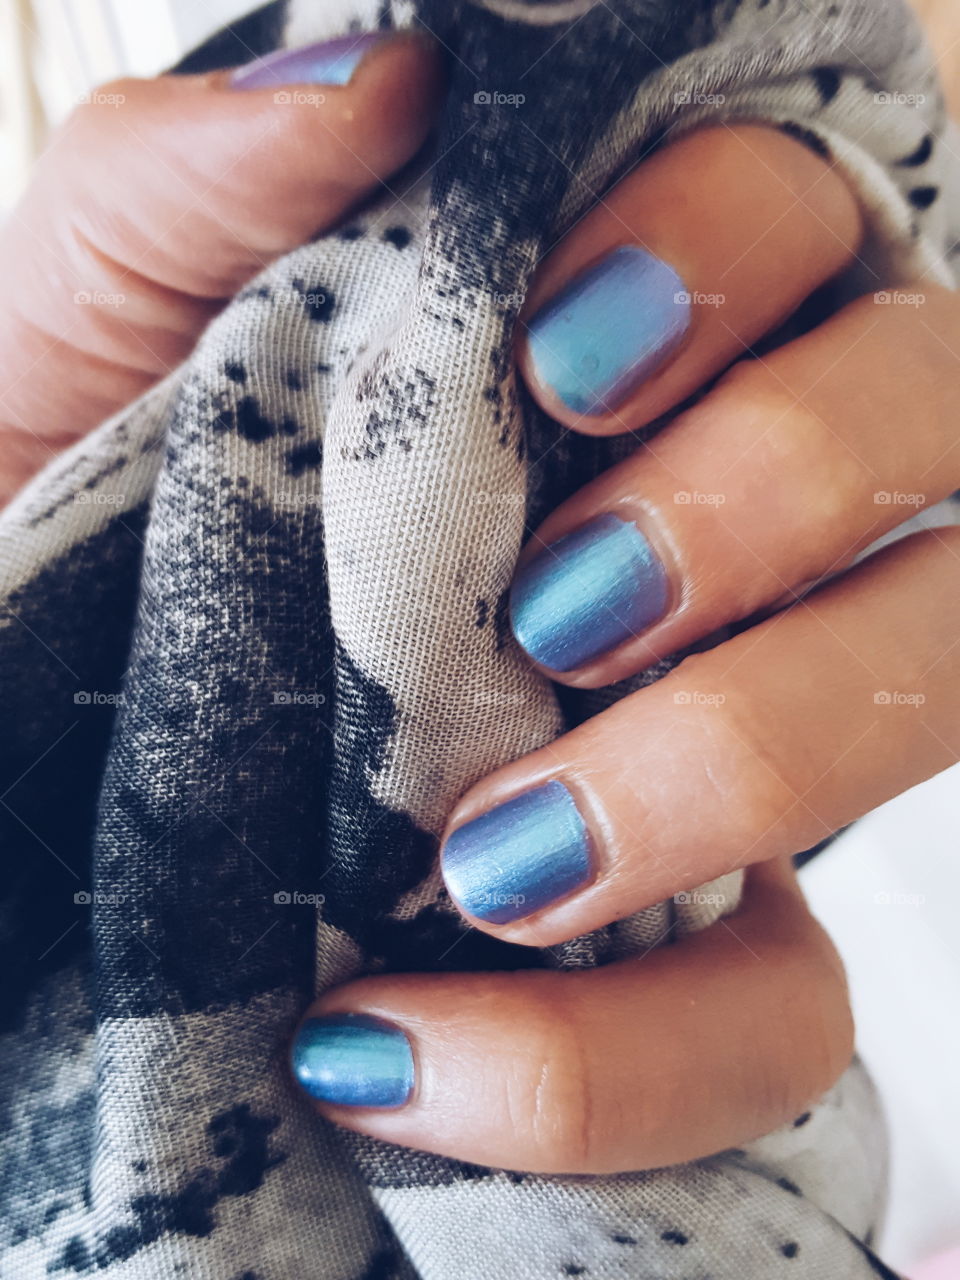 You can See the Gel Polish No. 07 called Blue Lagoon from Rival de Loop Young.